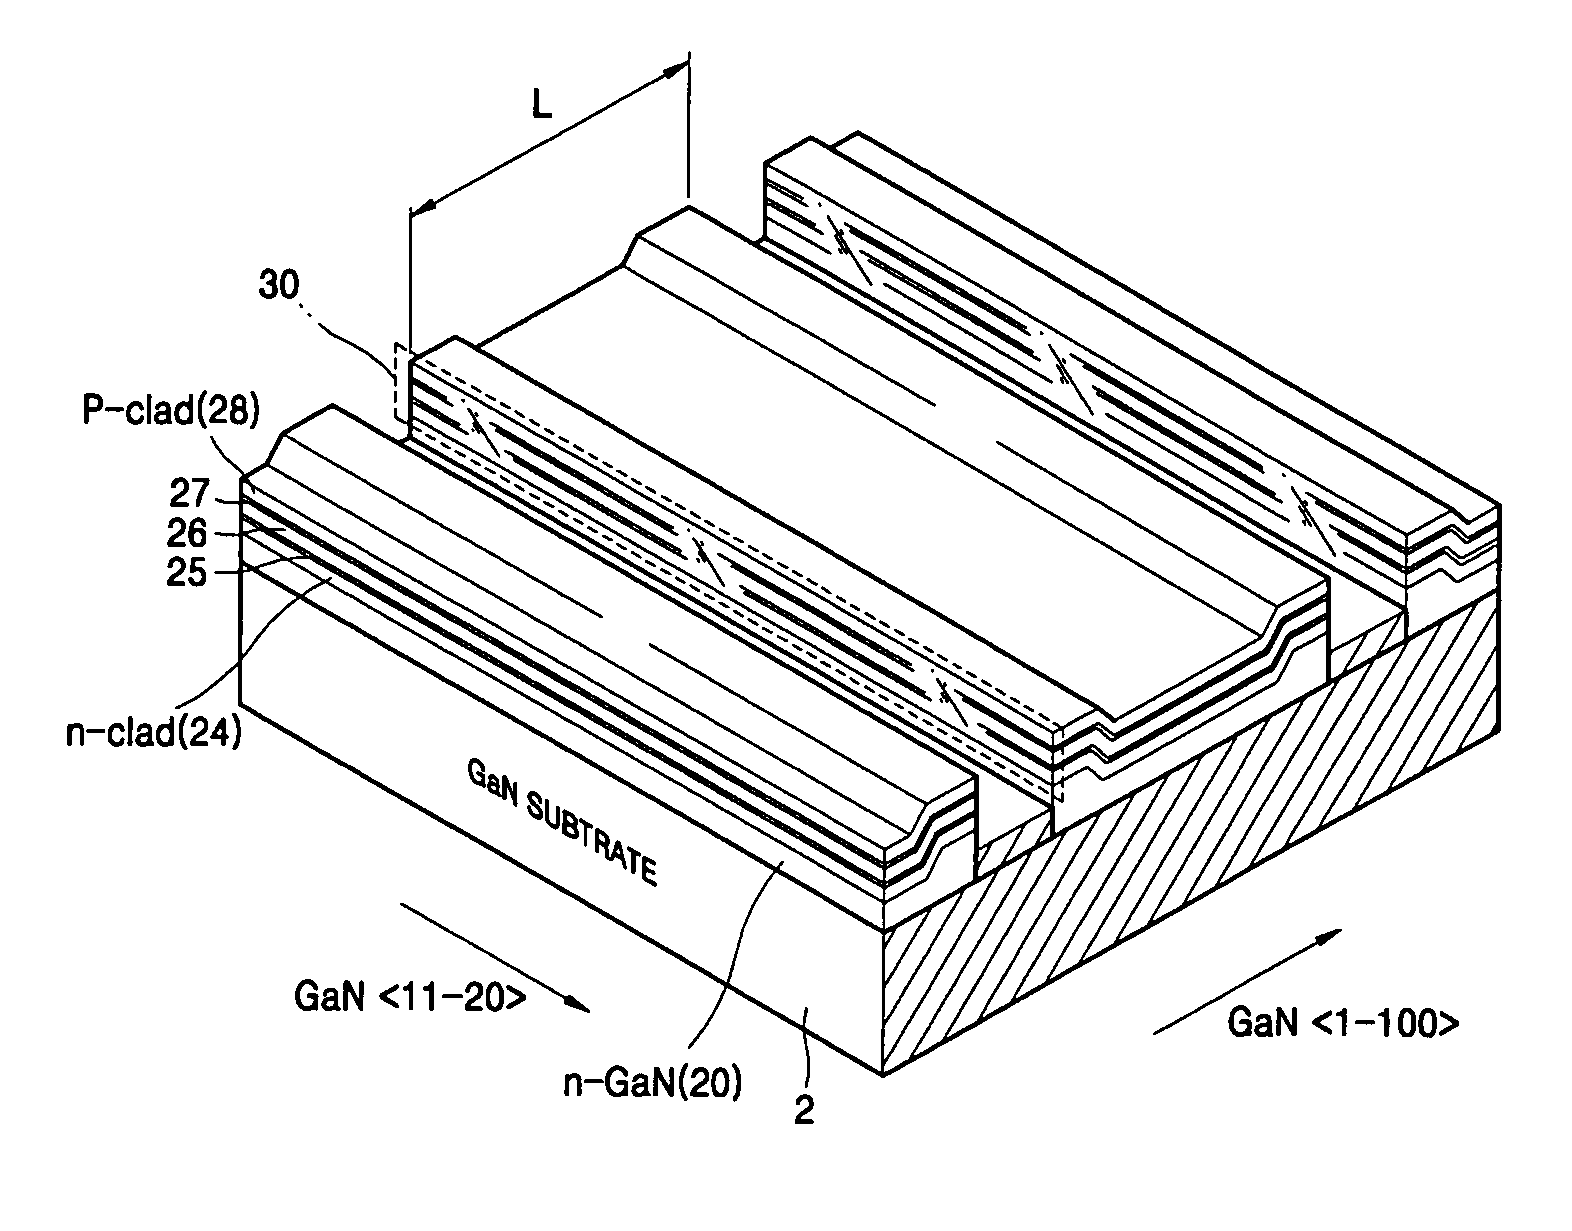 Method of fabricating nitride-based semiconductor laser diode